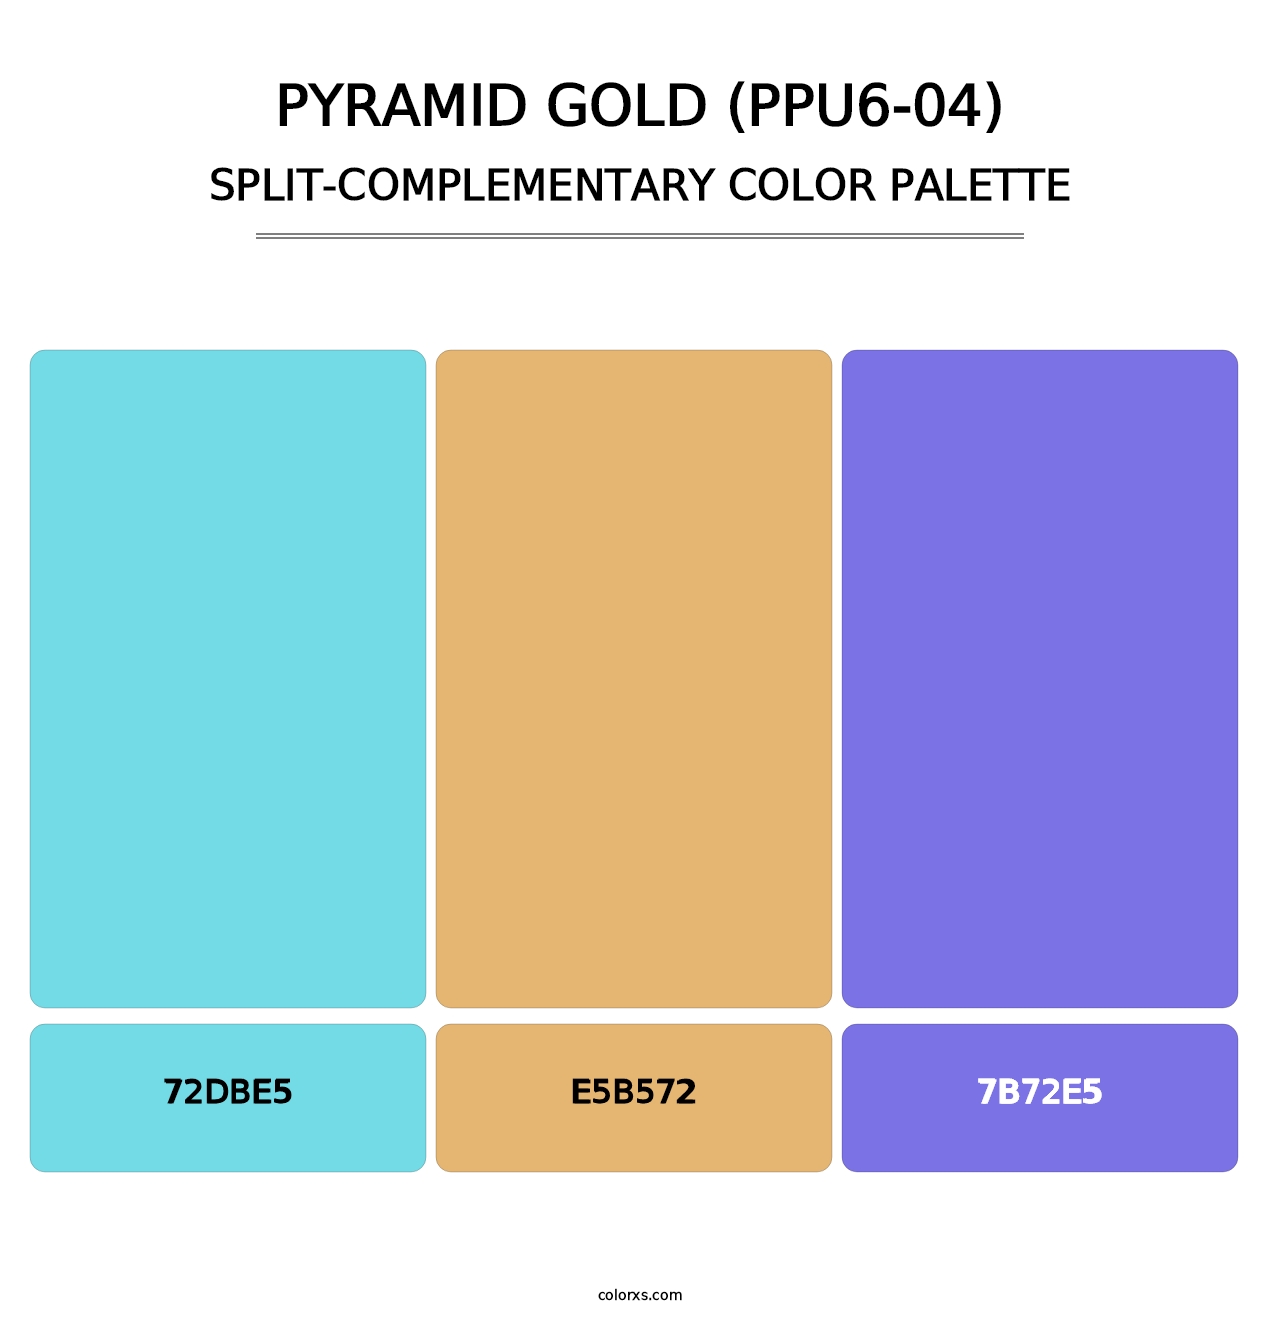 Pyramid Gold (PPU6-04) - Split-Complementary Color Palette